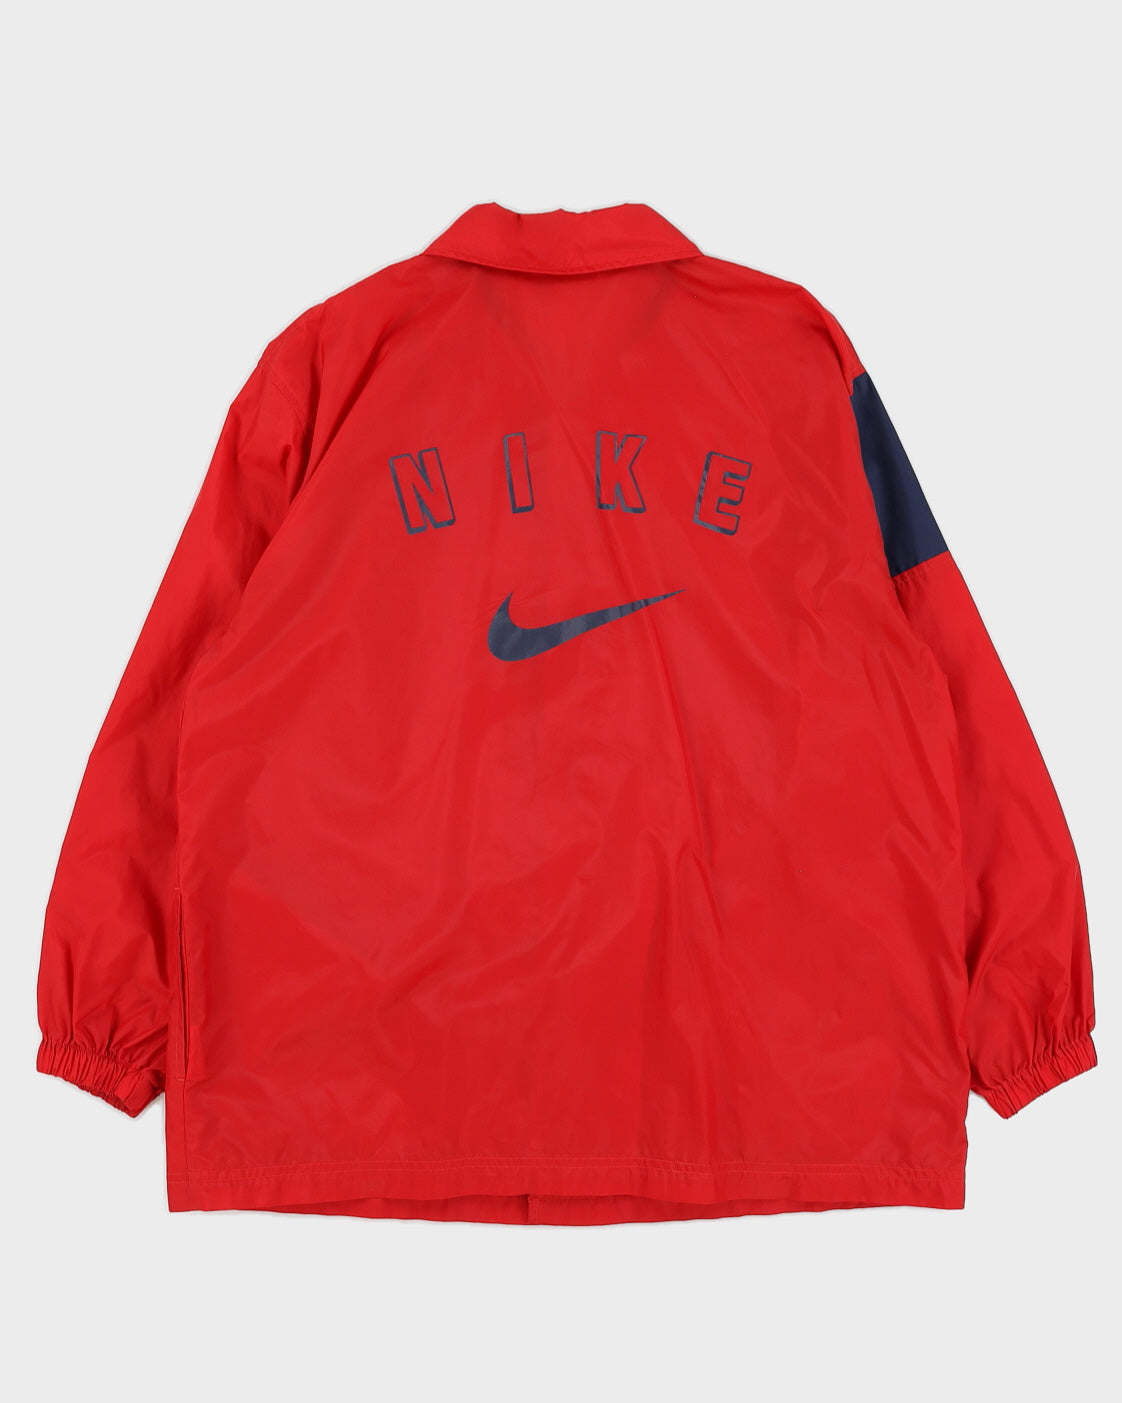 Vintage 90s Nike Red Jacket With Logo On The Back - L